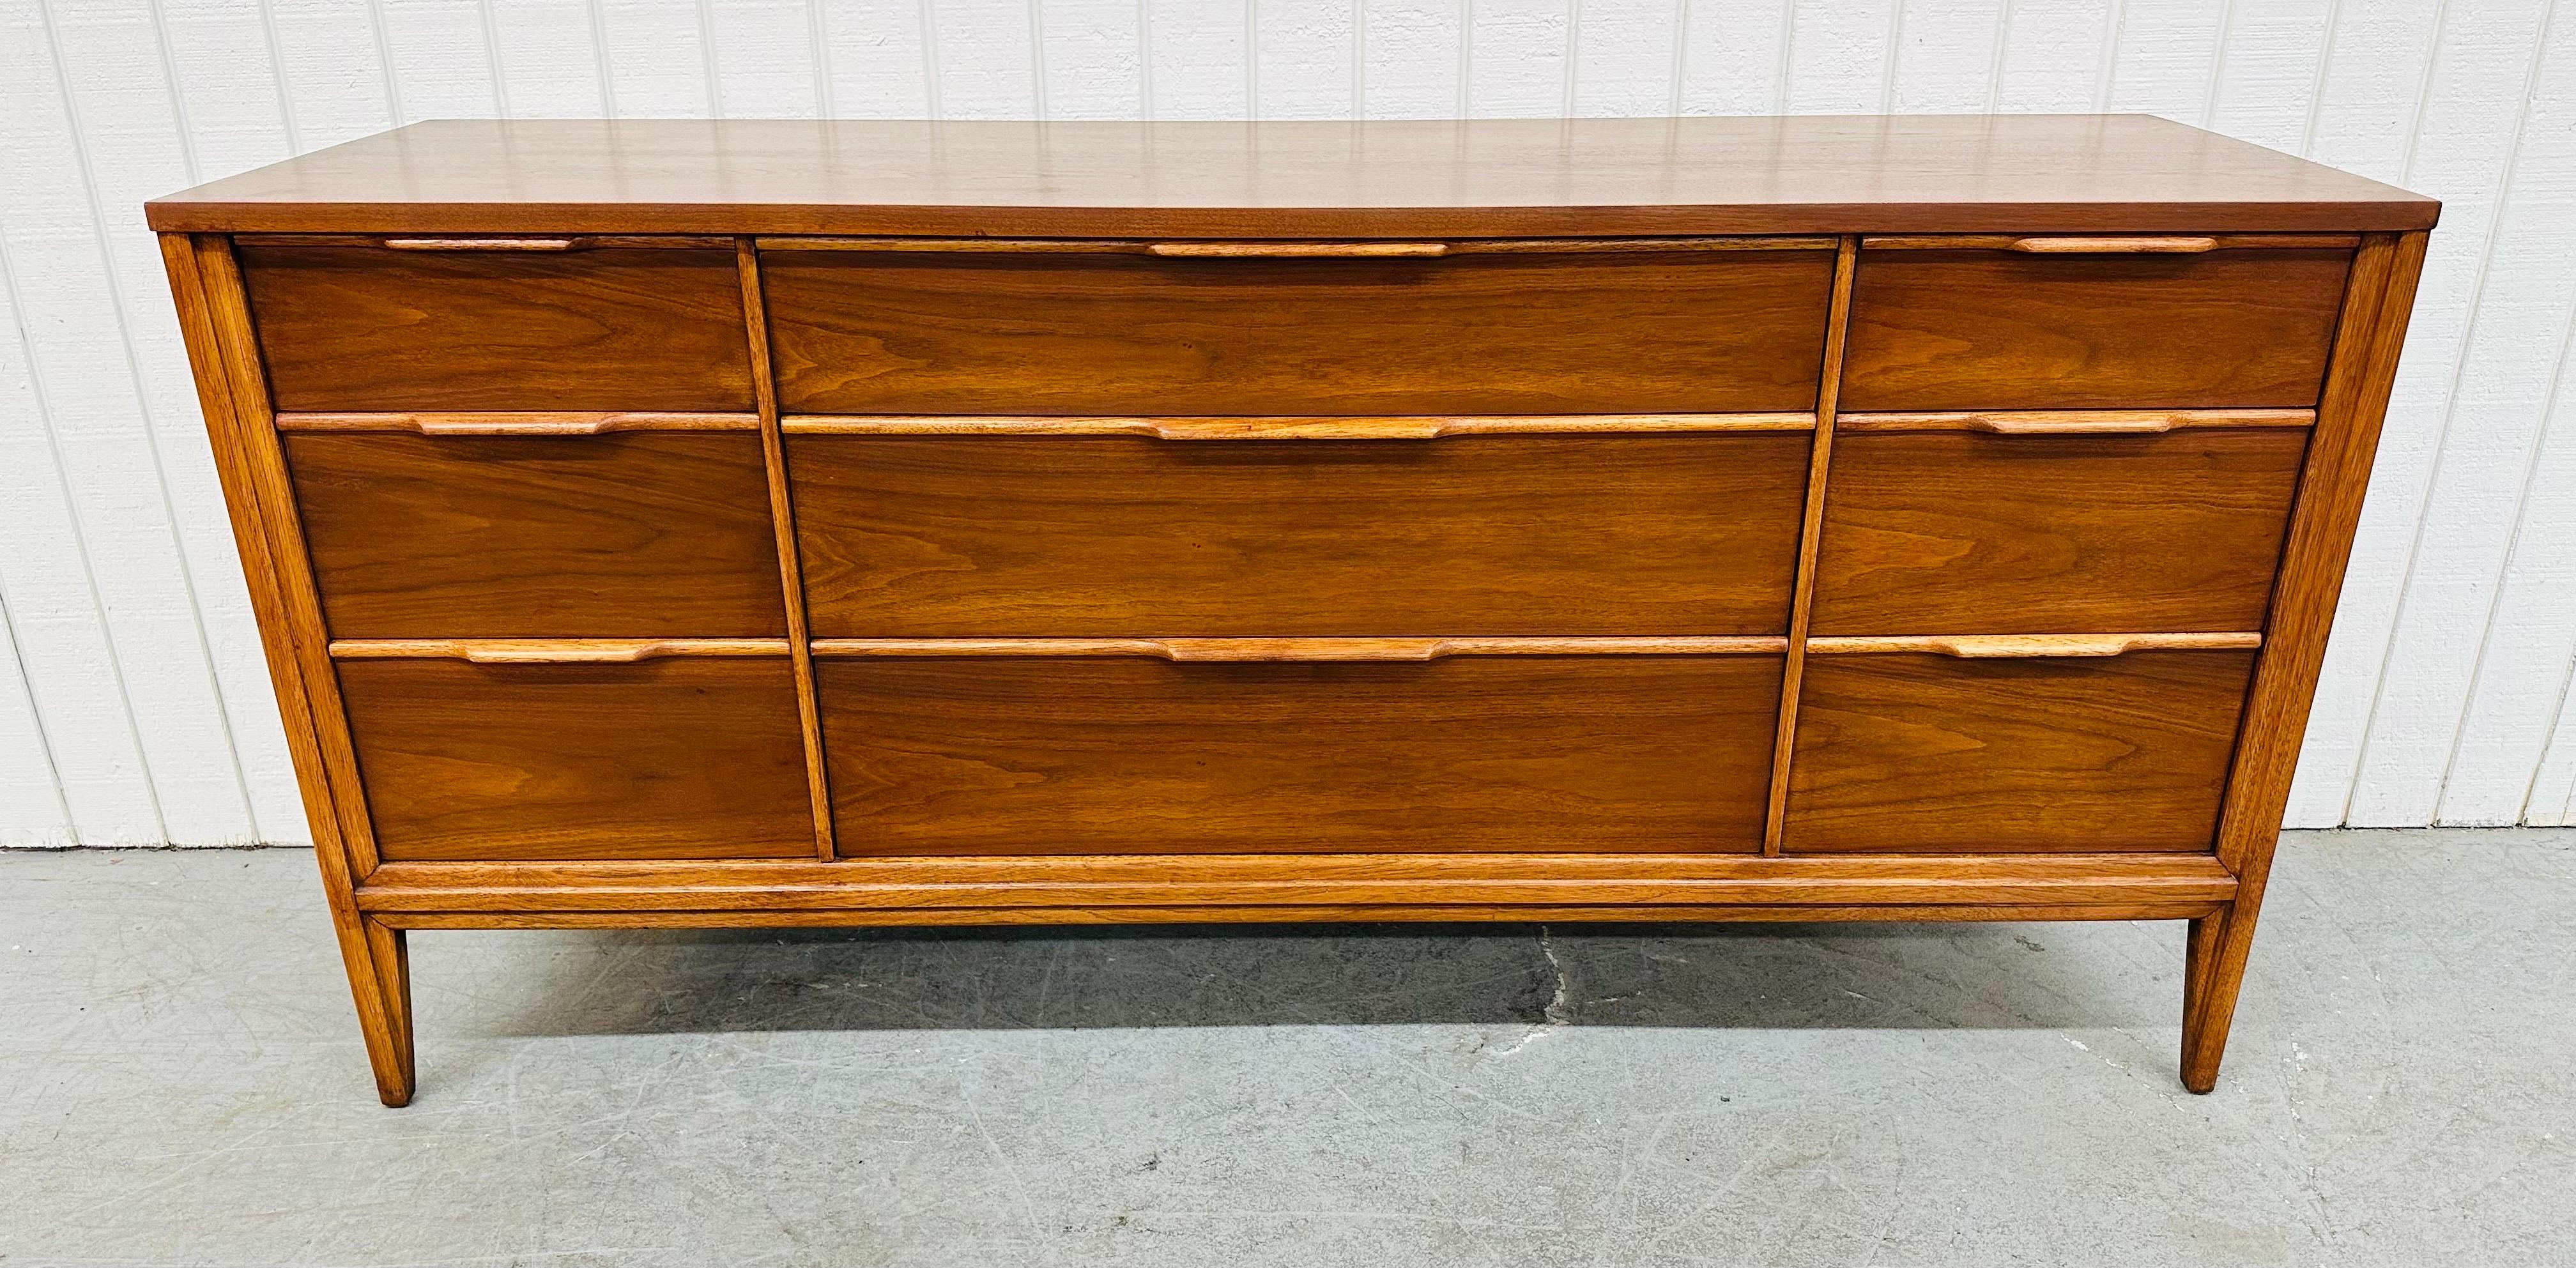 This listing is for a Mid-Century Modern Kent Coffey “Carefree” Walnut Dresser. Featuring a straight line design, nine drawers for storage, wooden pulls, and a beautiful walnut finish. This is an exceptional combination of quality and design by Kent